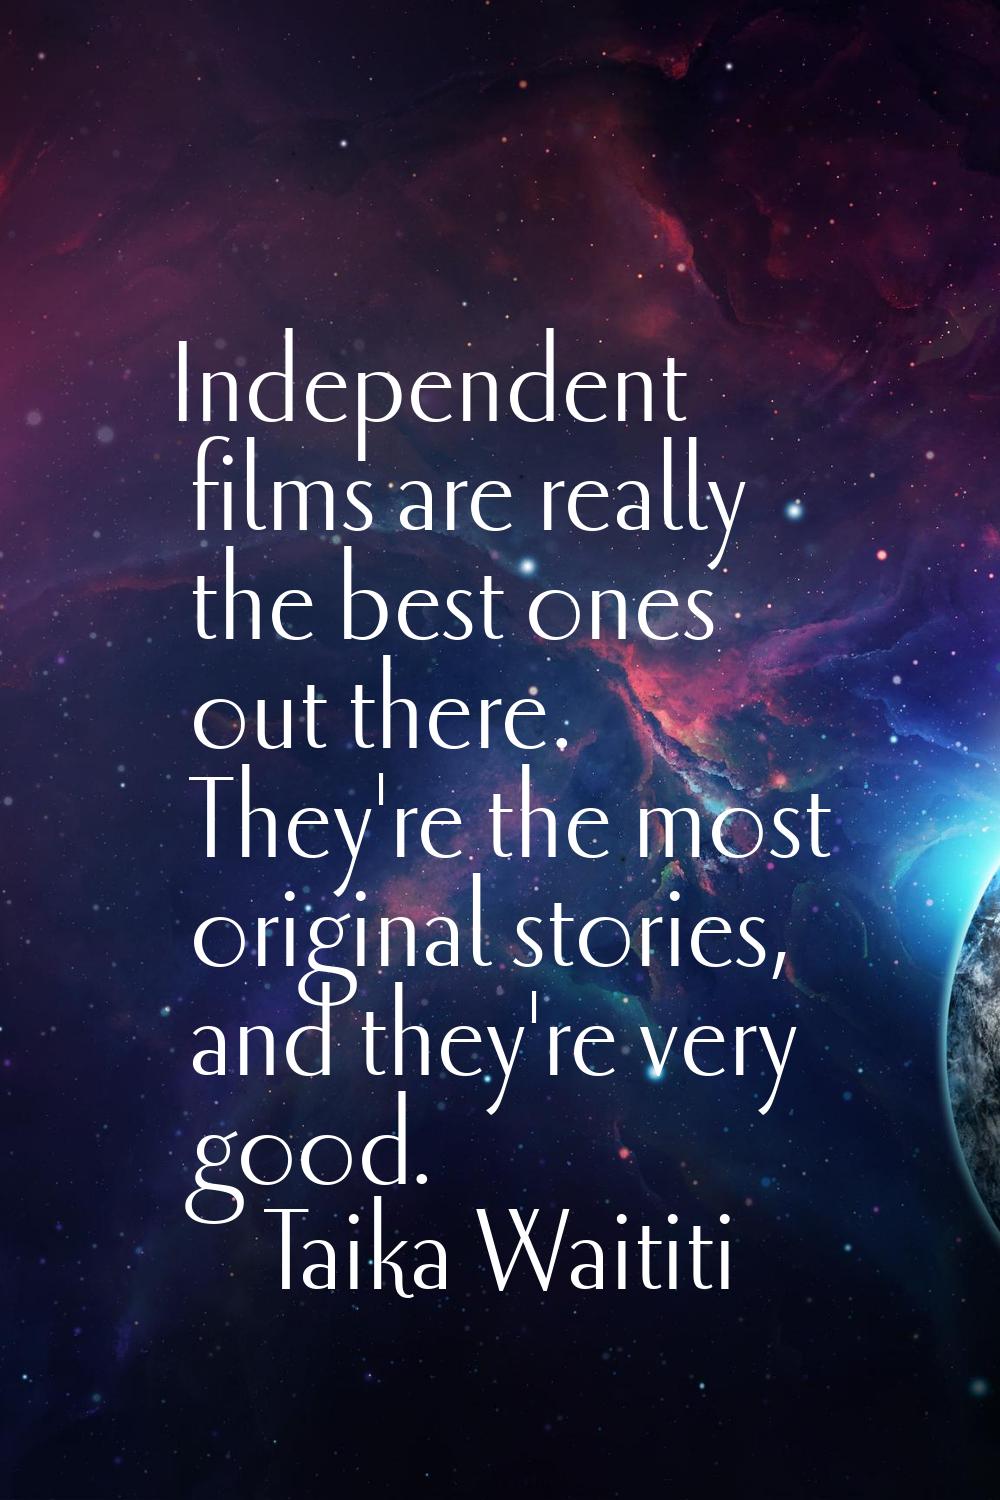 Independent films are really the best ones out there. They're the most original stories, and they'r